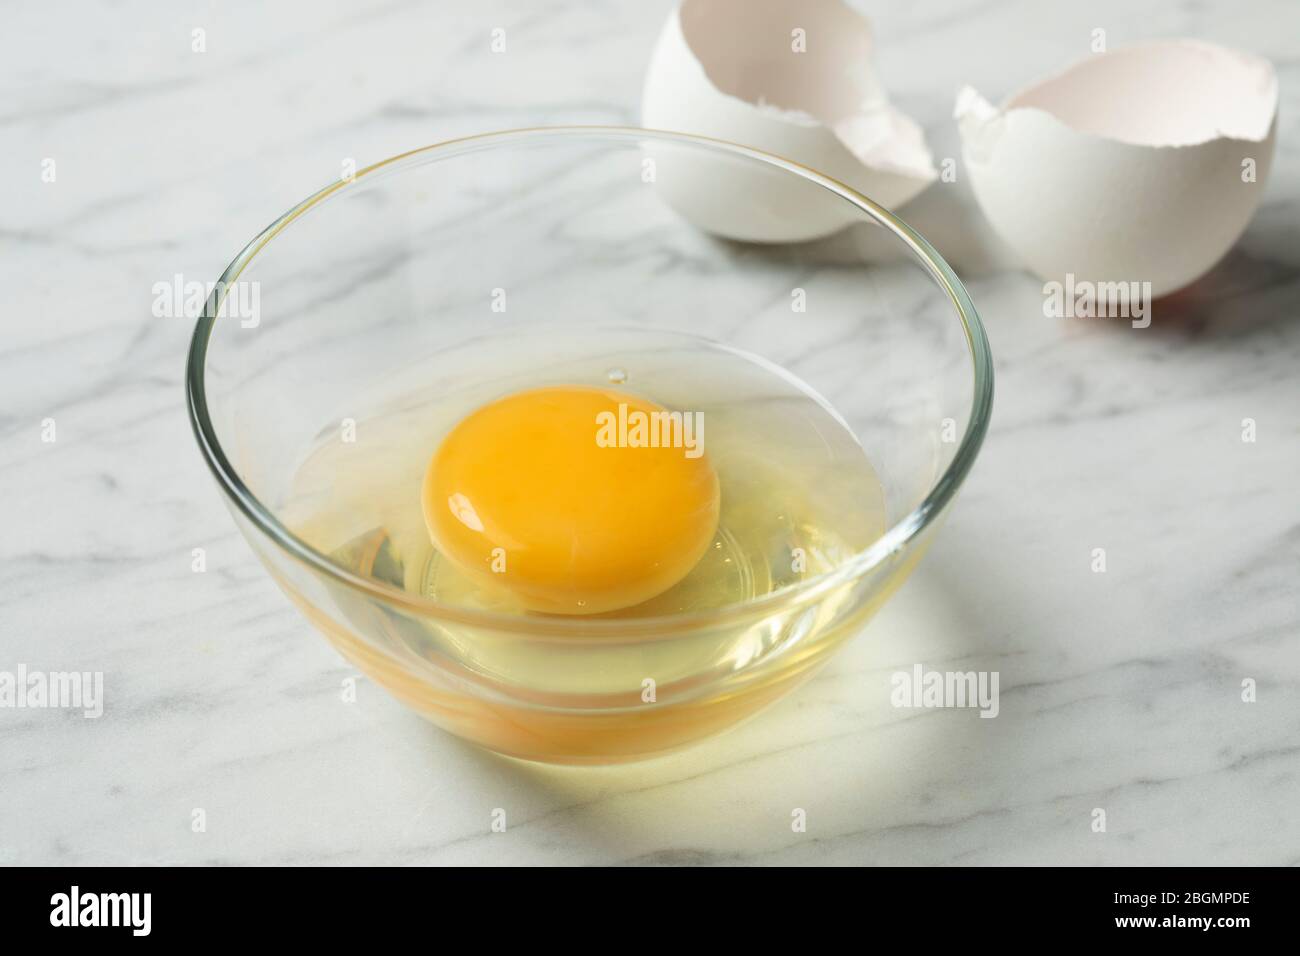 Fresh raw egg in a bowl close up with white shells in the background Stock Photo